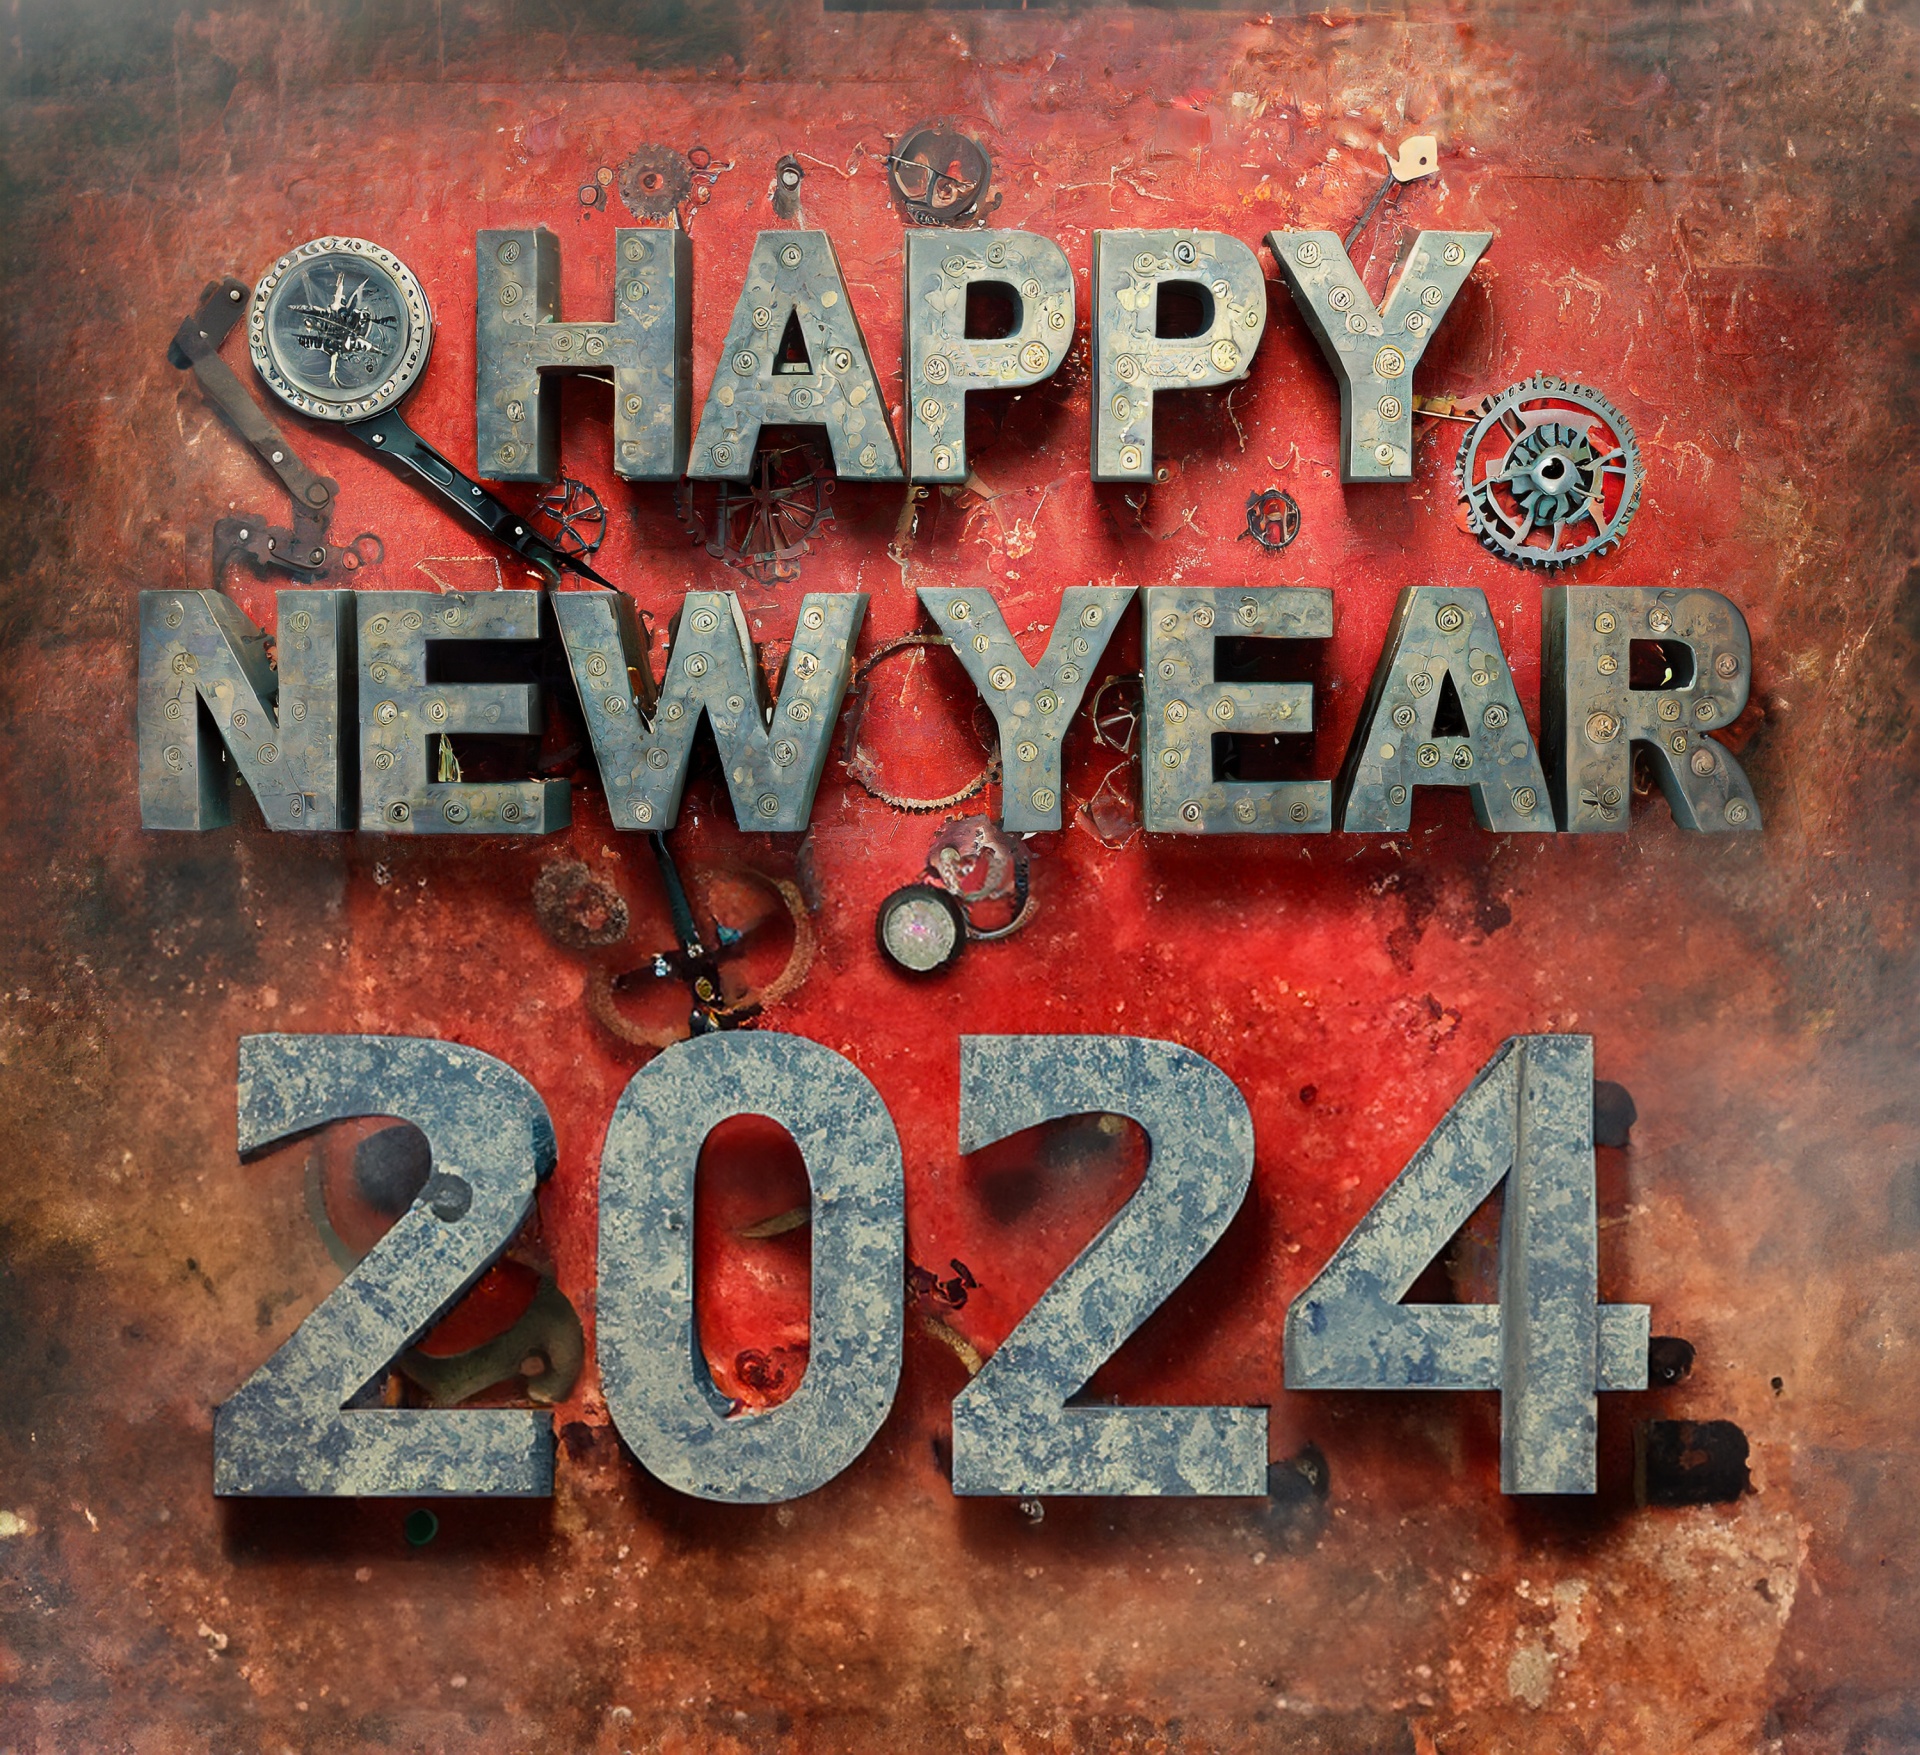 New Year, 2024, Greeting Card Free Stock Photo - Public Domain Pictures